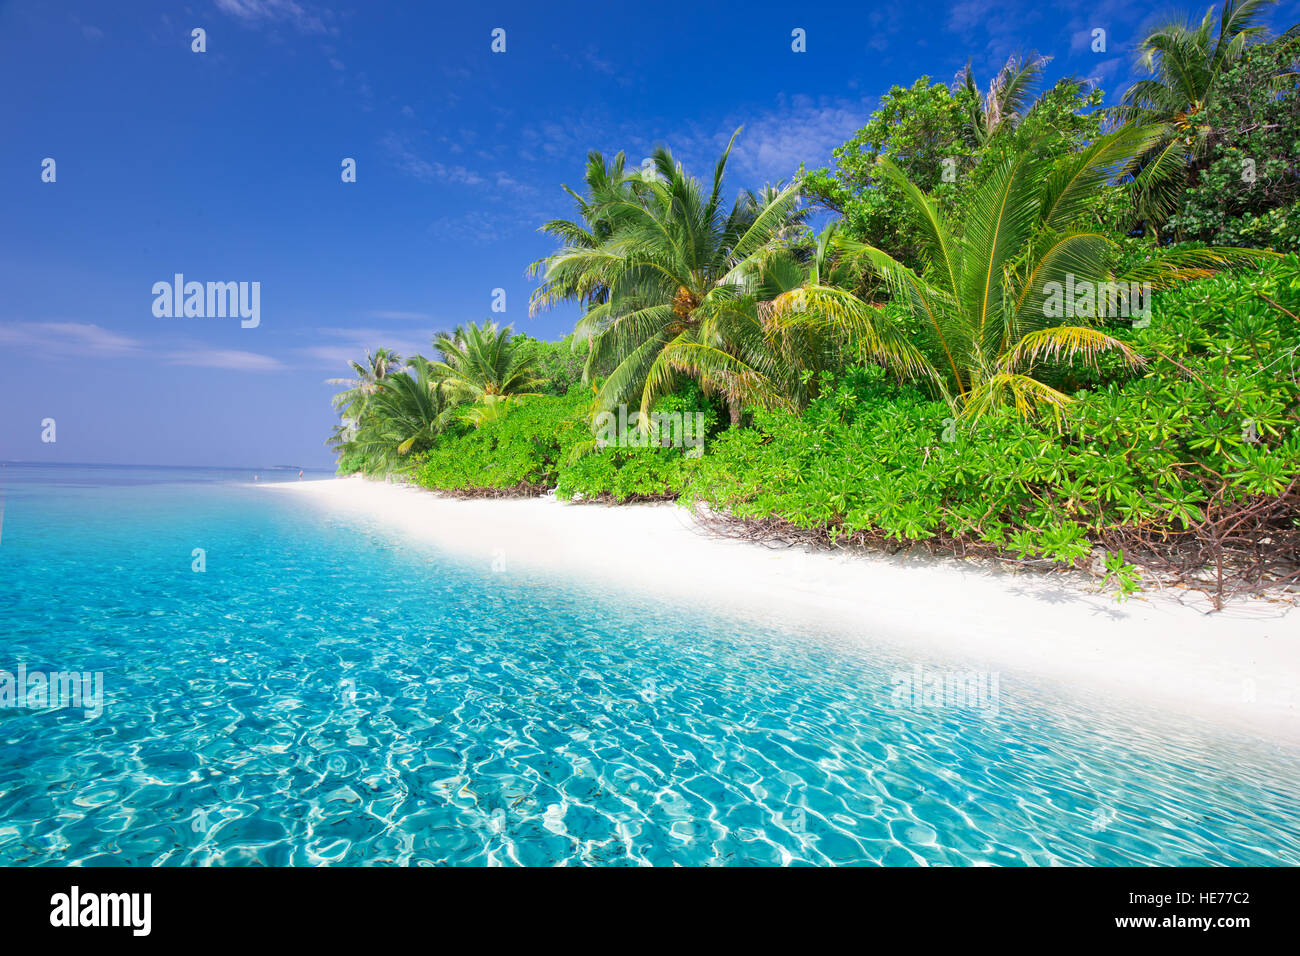 Tropical island with sandy beach, turquoise clear water and palm trees Stock Photo